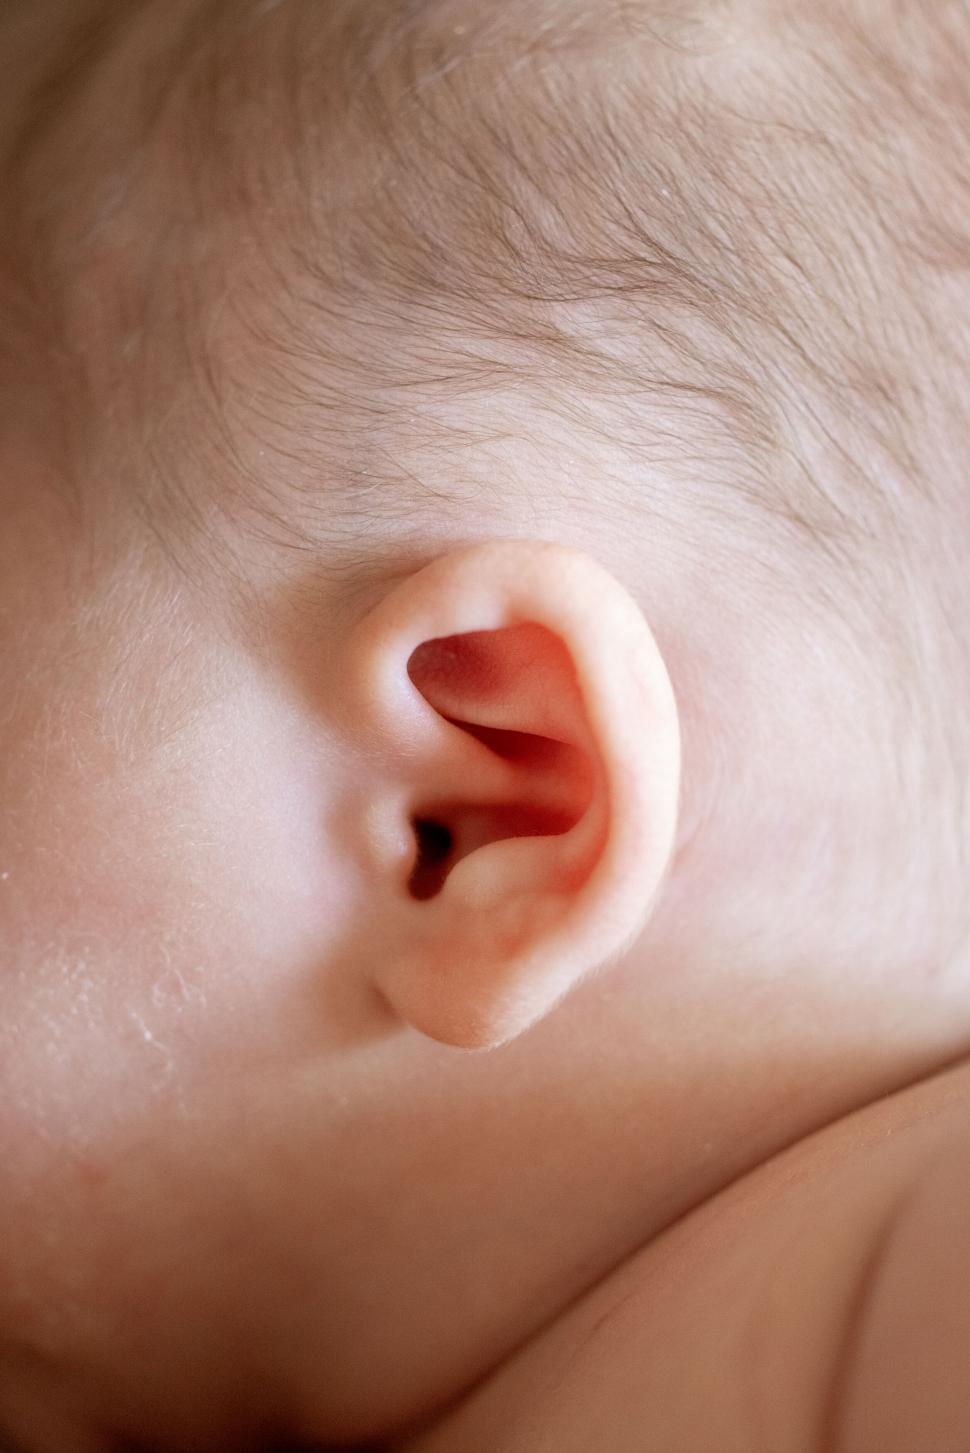 Free Image of Baby ear closeup showing tiny details 